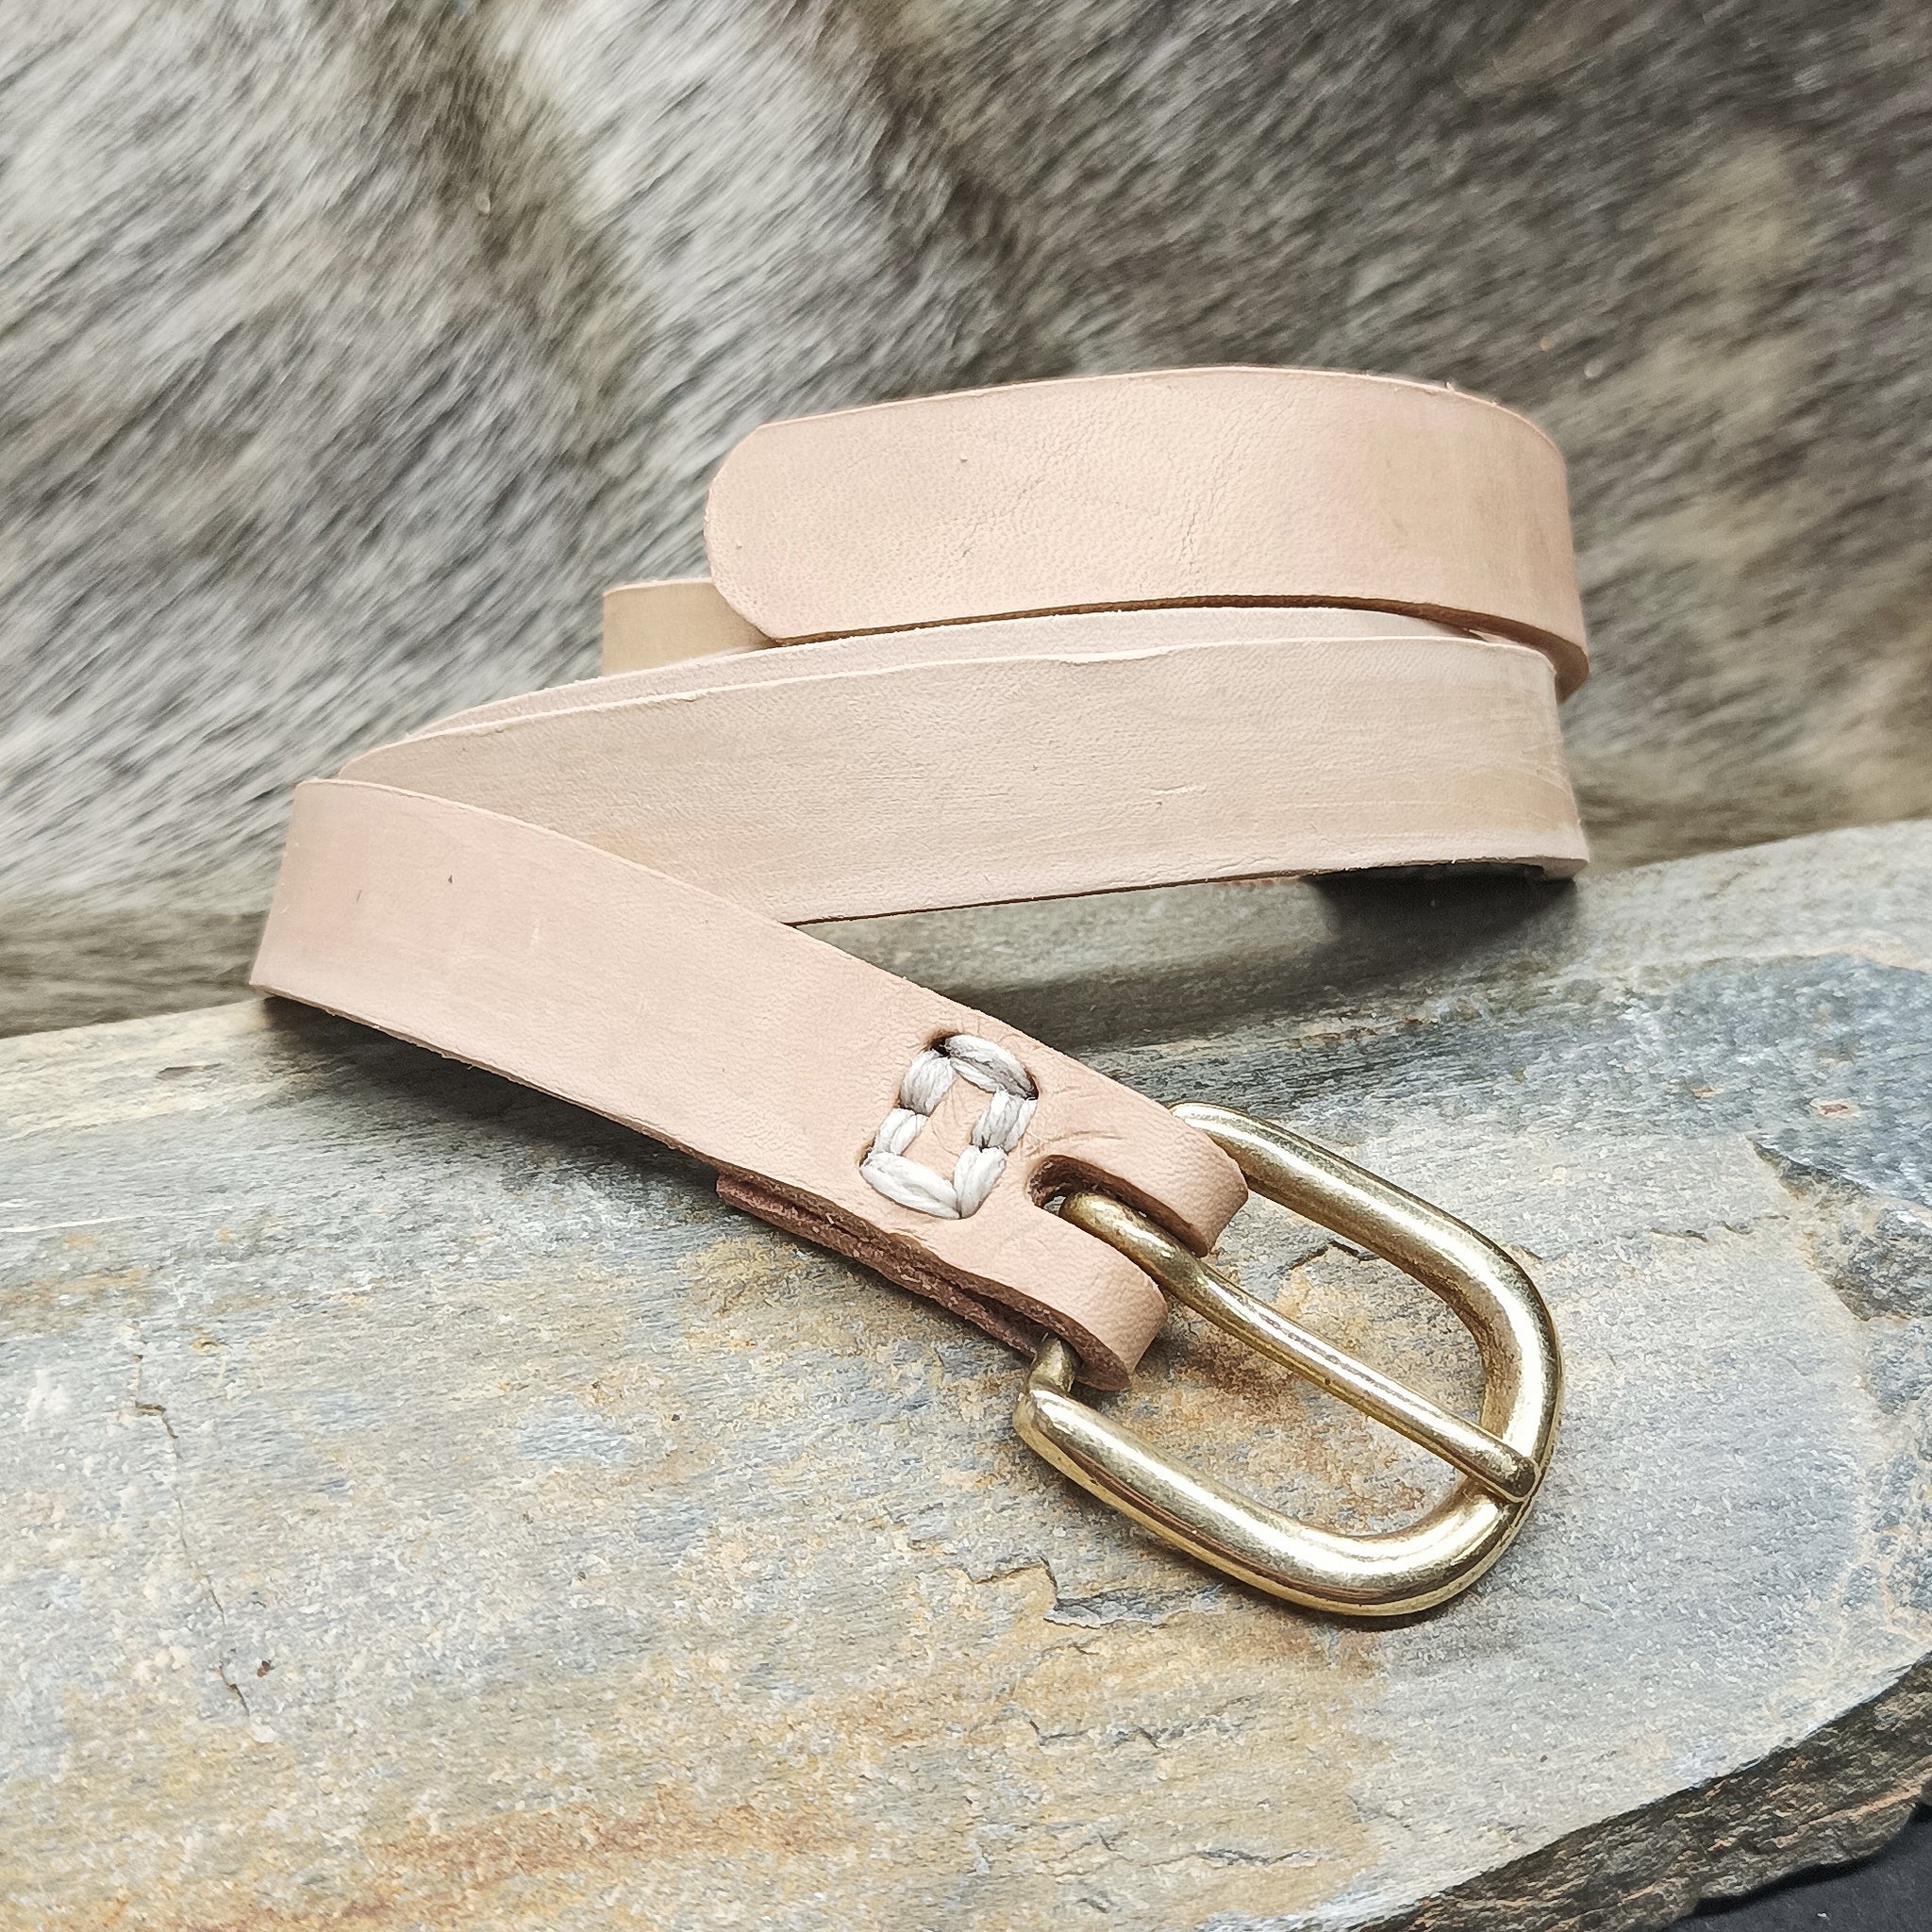 Standard Leather Baldric with Brass Buckle - Natural Veg Tan with Natural Linen Thread